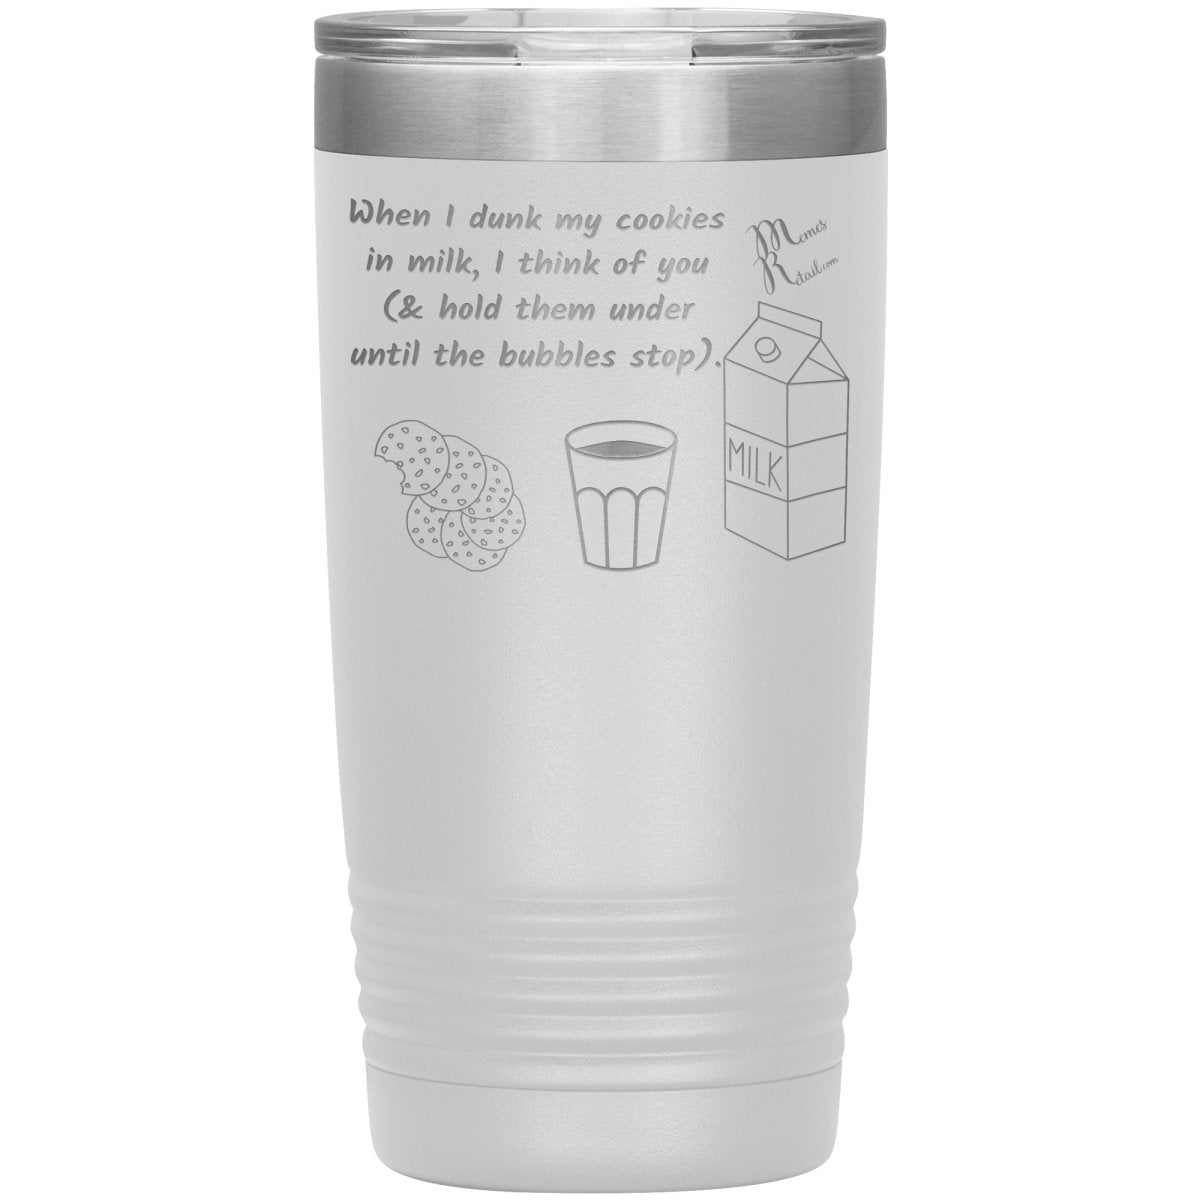 When I dunk My Cookies in Milk, I think of You - Tumblers, 20oz Insulated Tumbler / White - MemesRetail.com